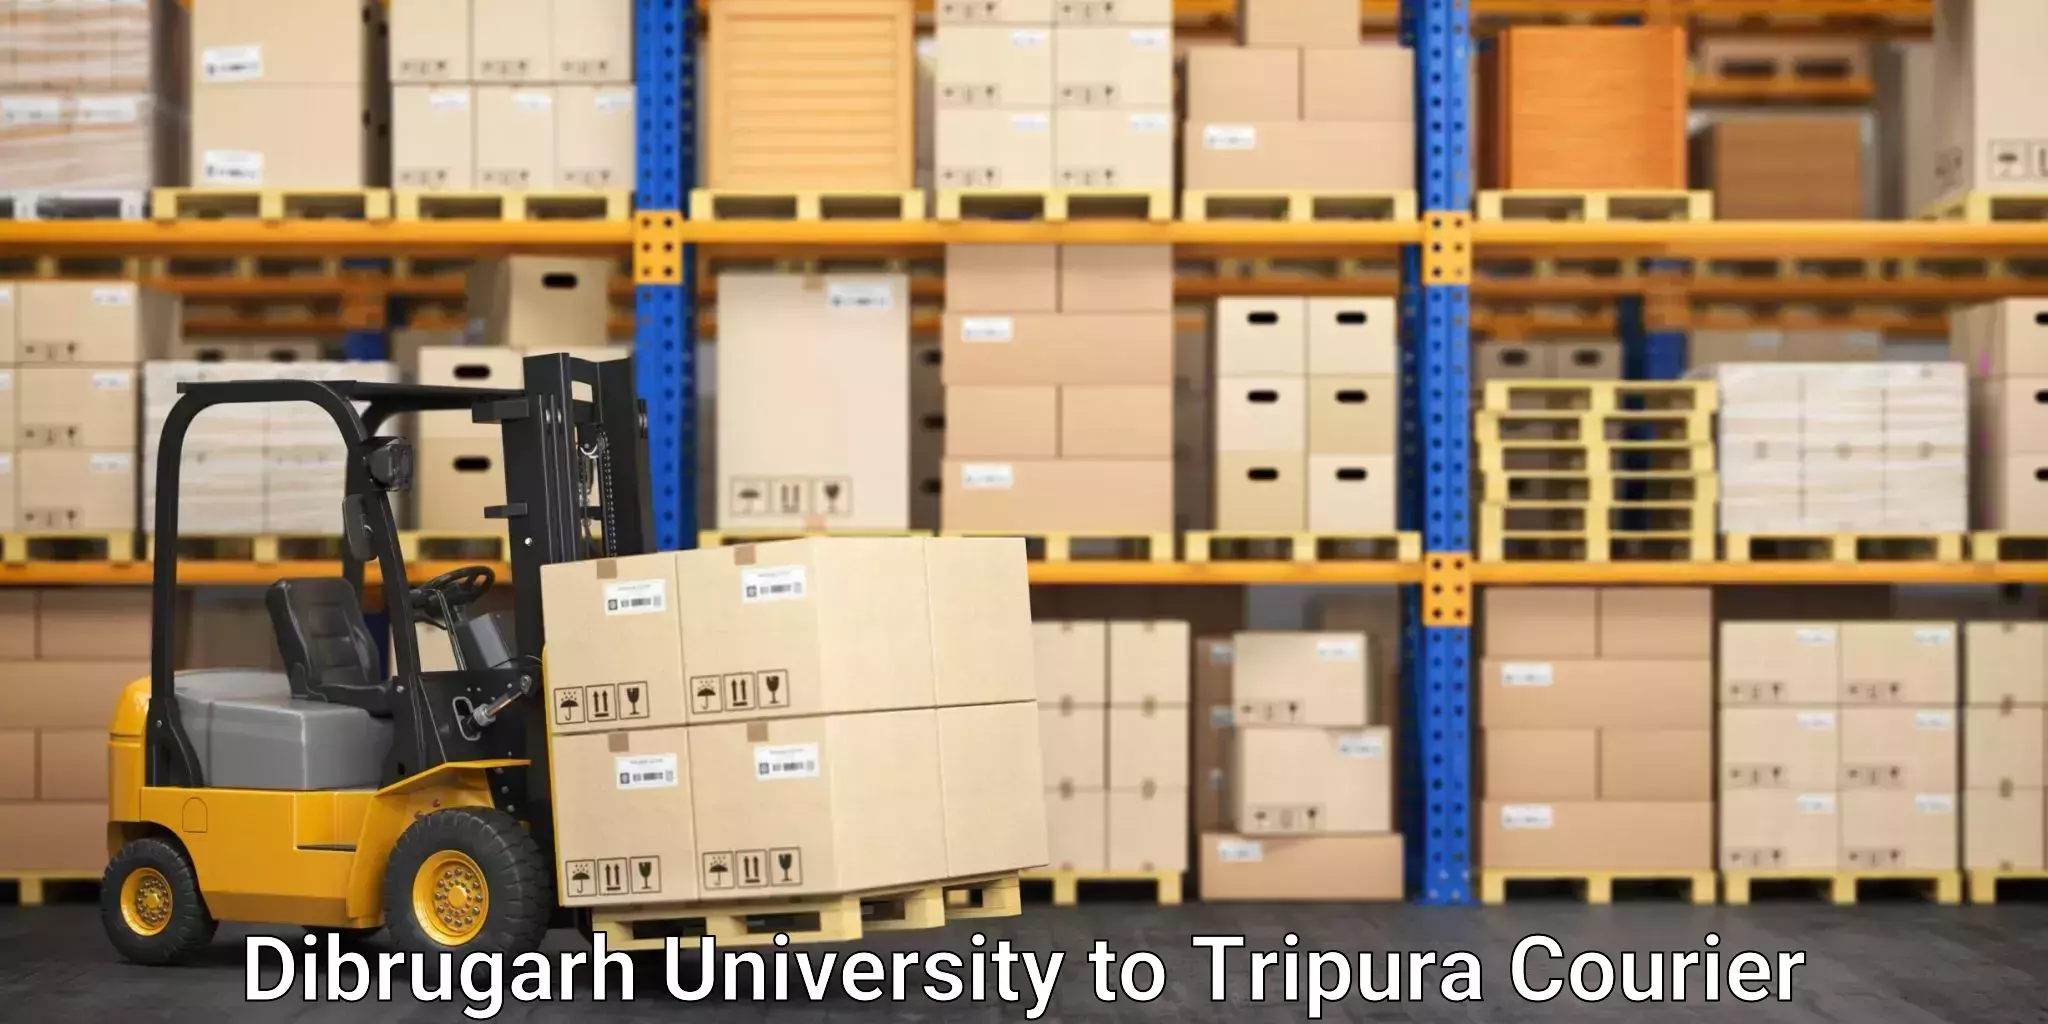 State-of-the-art courier technology Dibrugarh University to Agartala